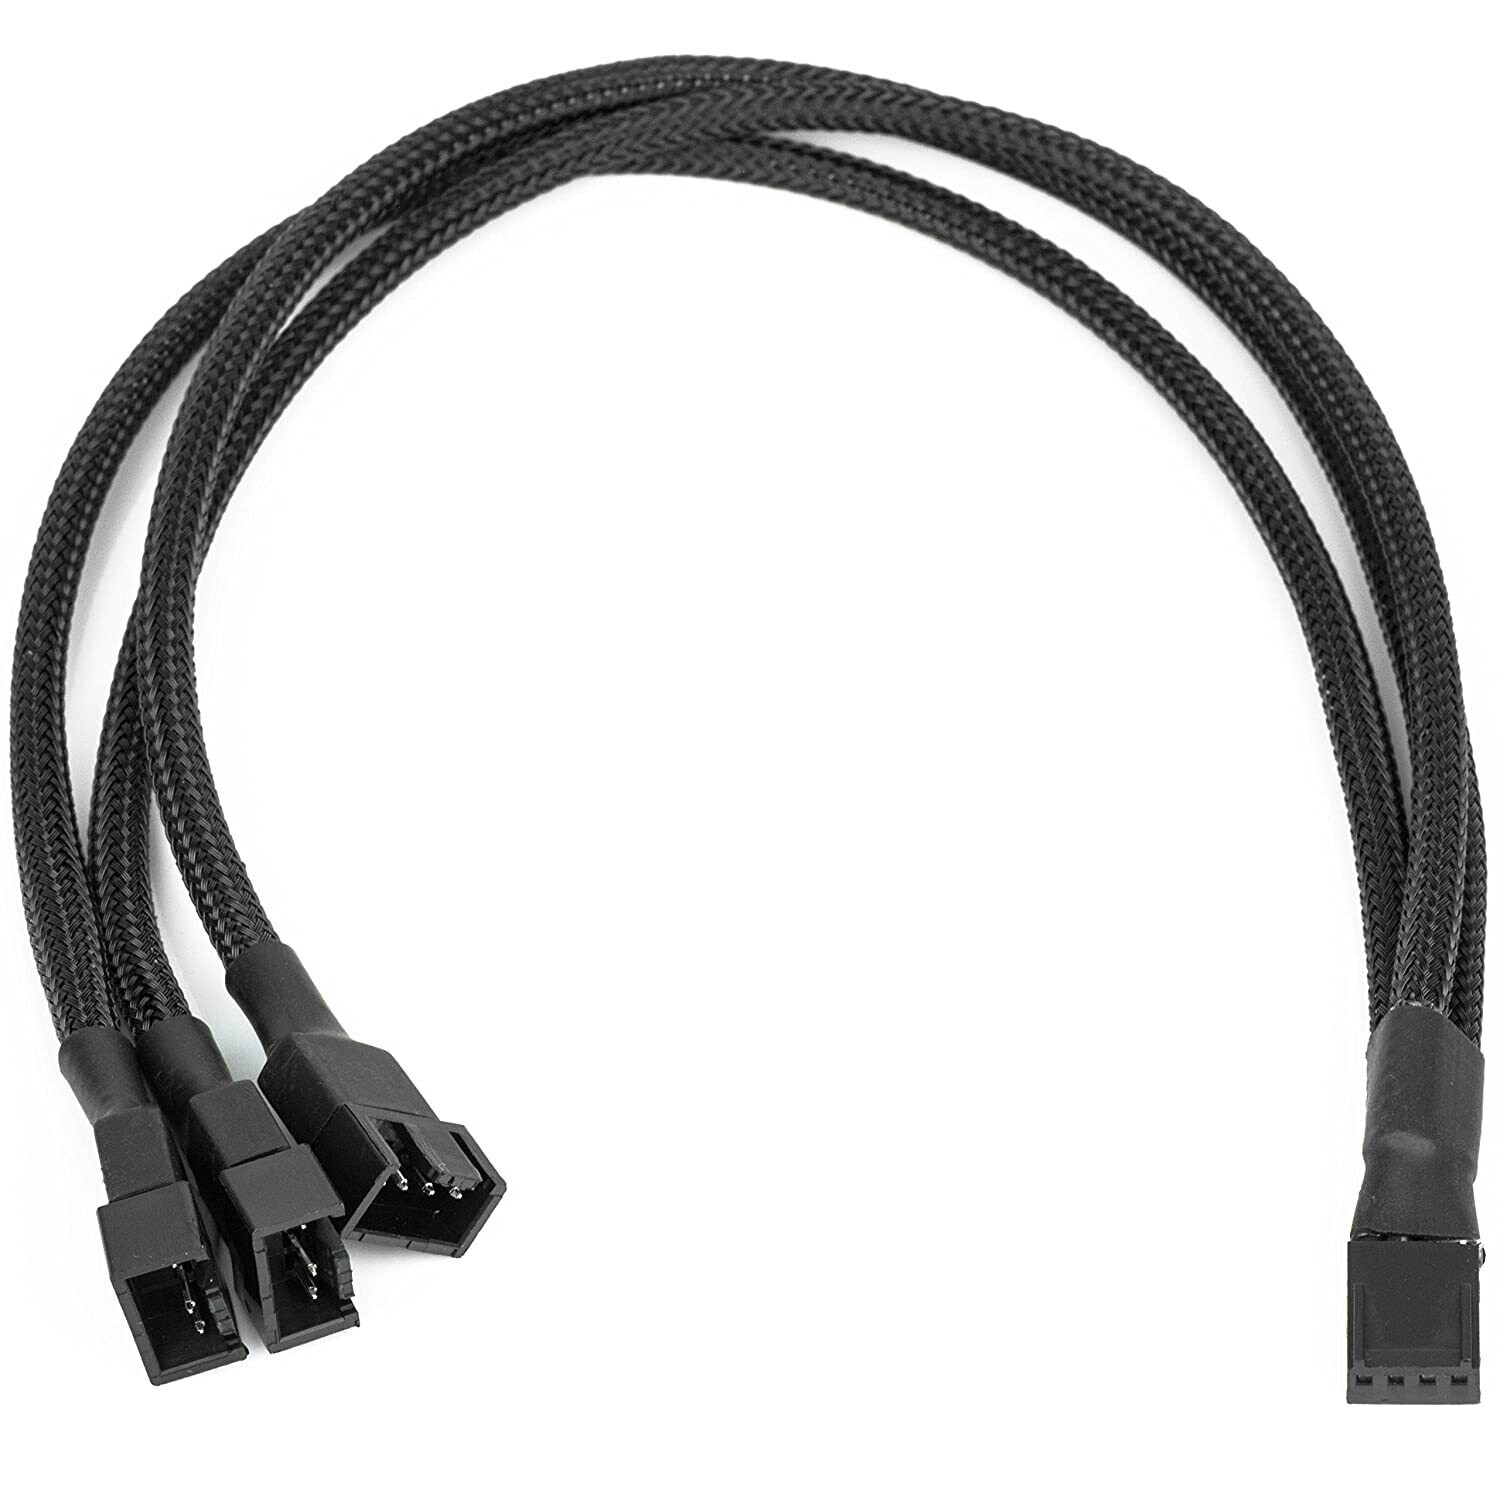 4 pin Fan Cable 1 to 3 ways Splitter Black Sleeved Extension Cable